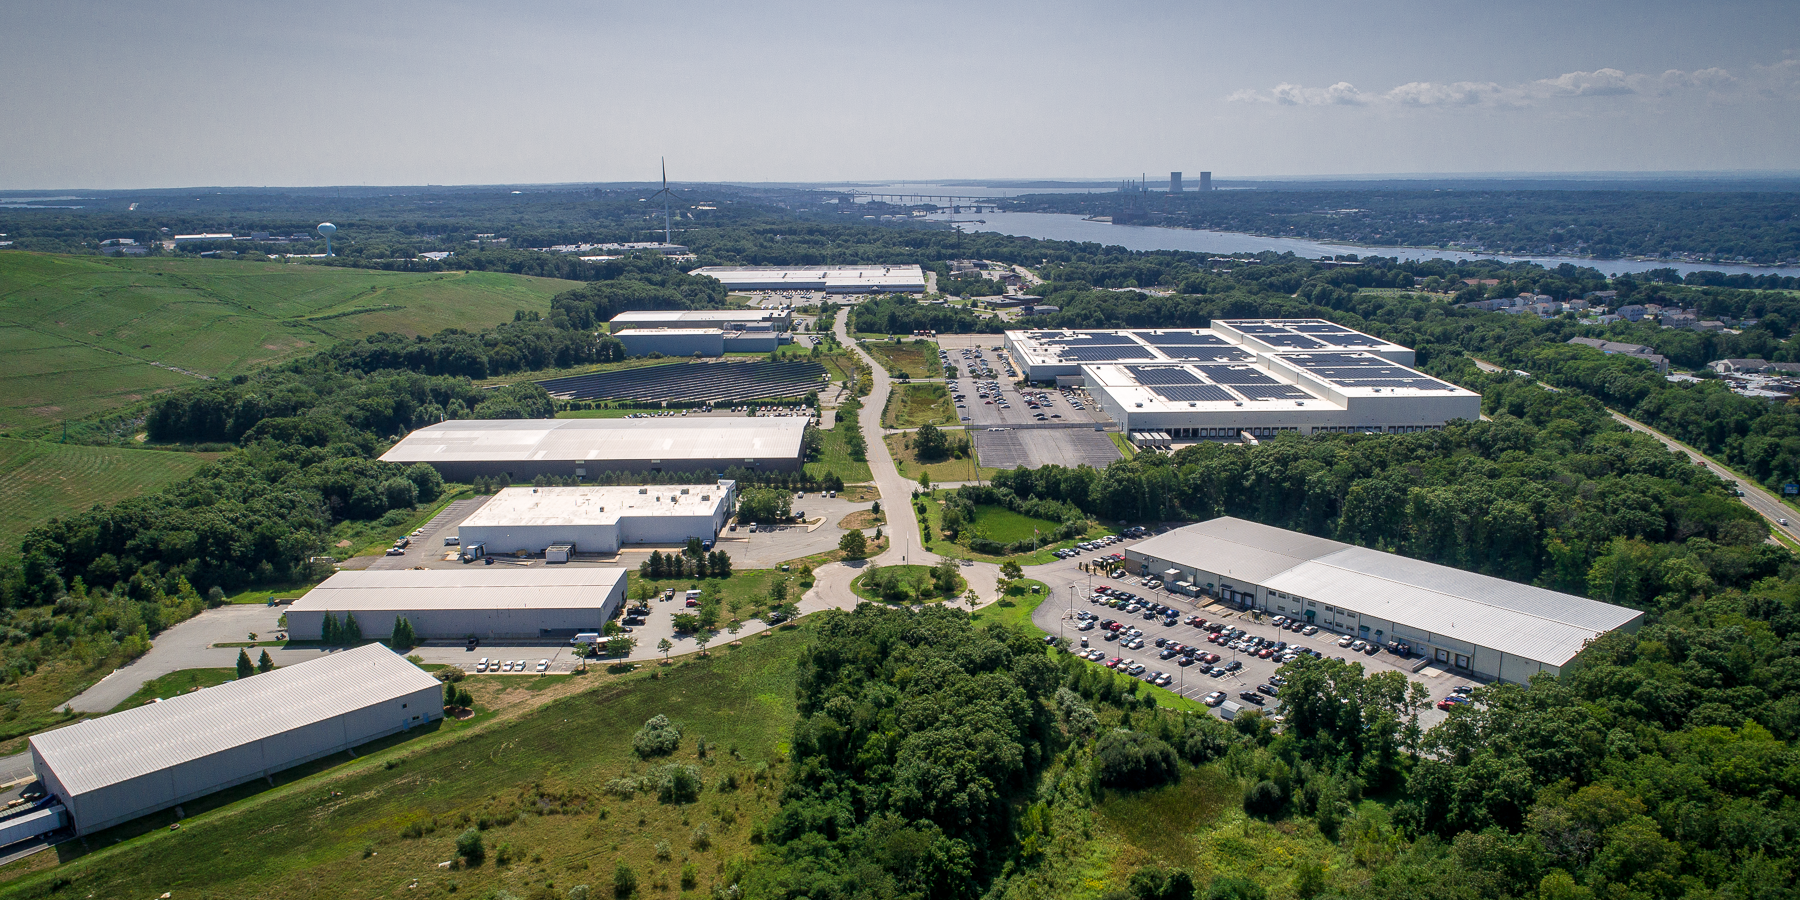 Fall River Industrial Park